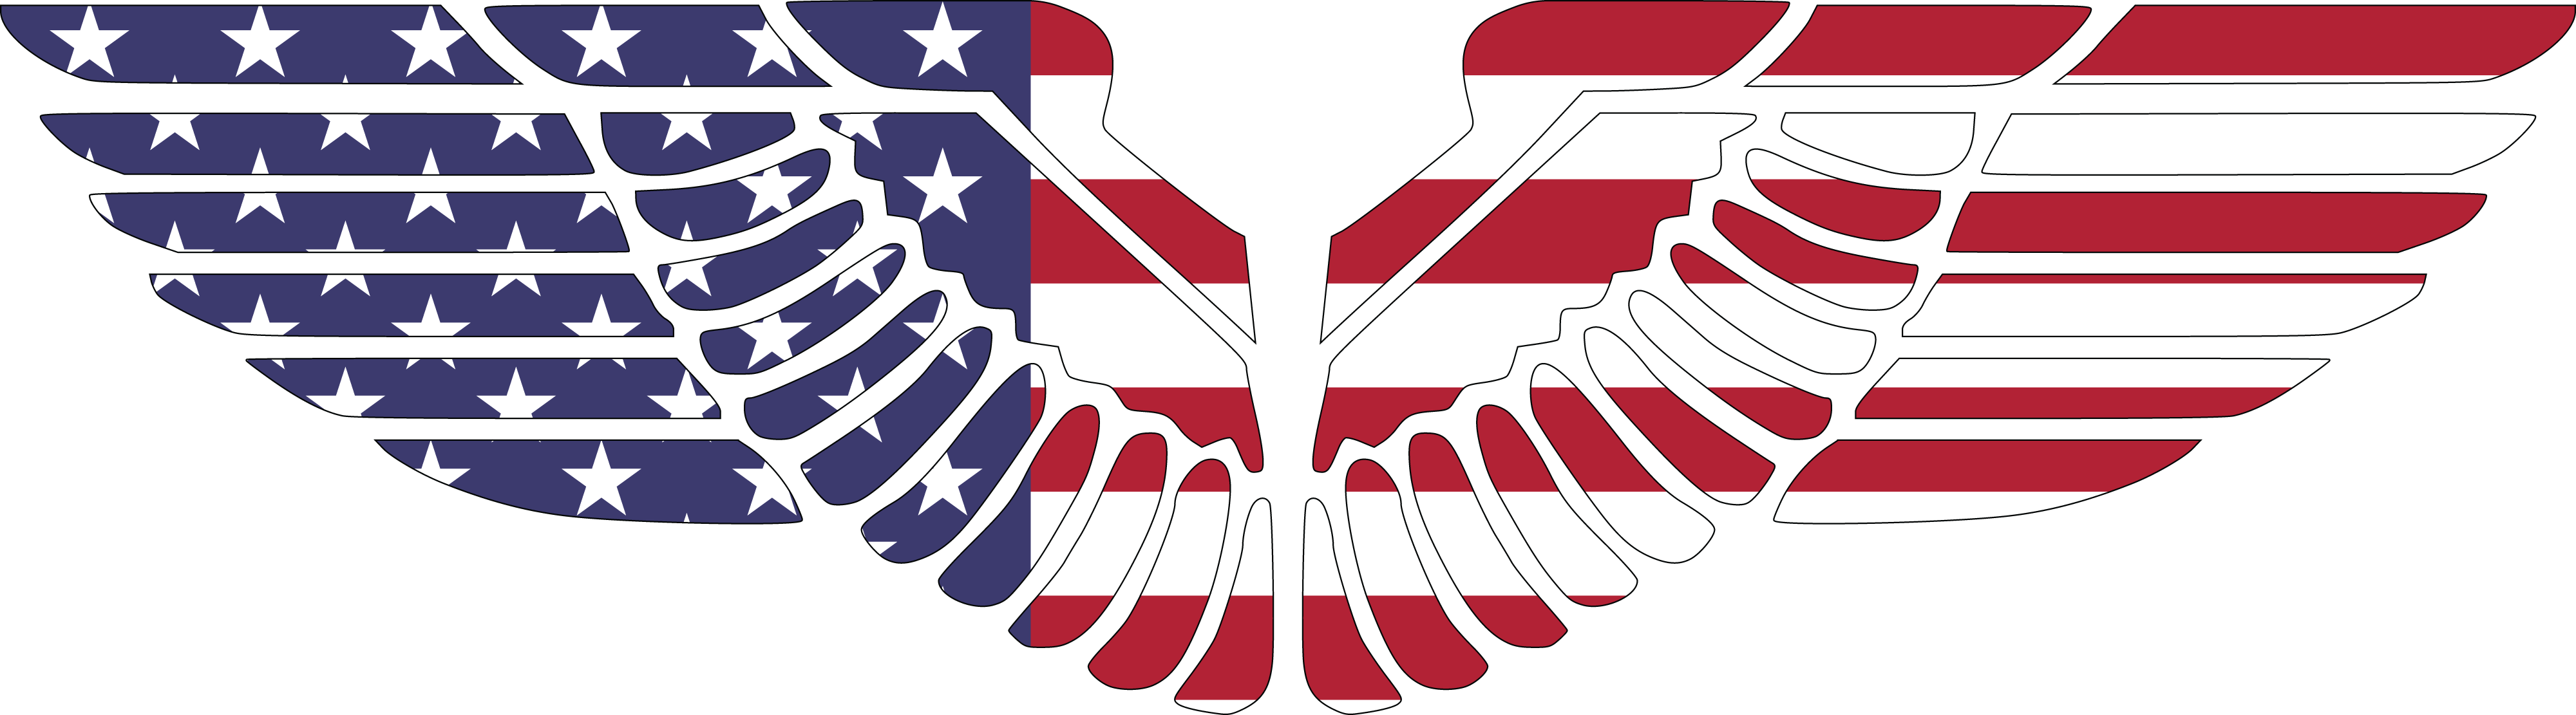 Free Clipart Of Eagle Wings In American Flag